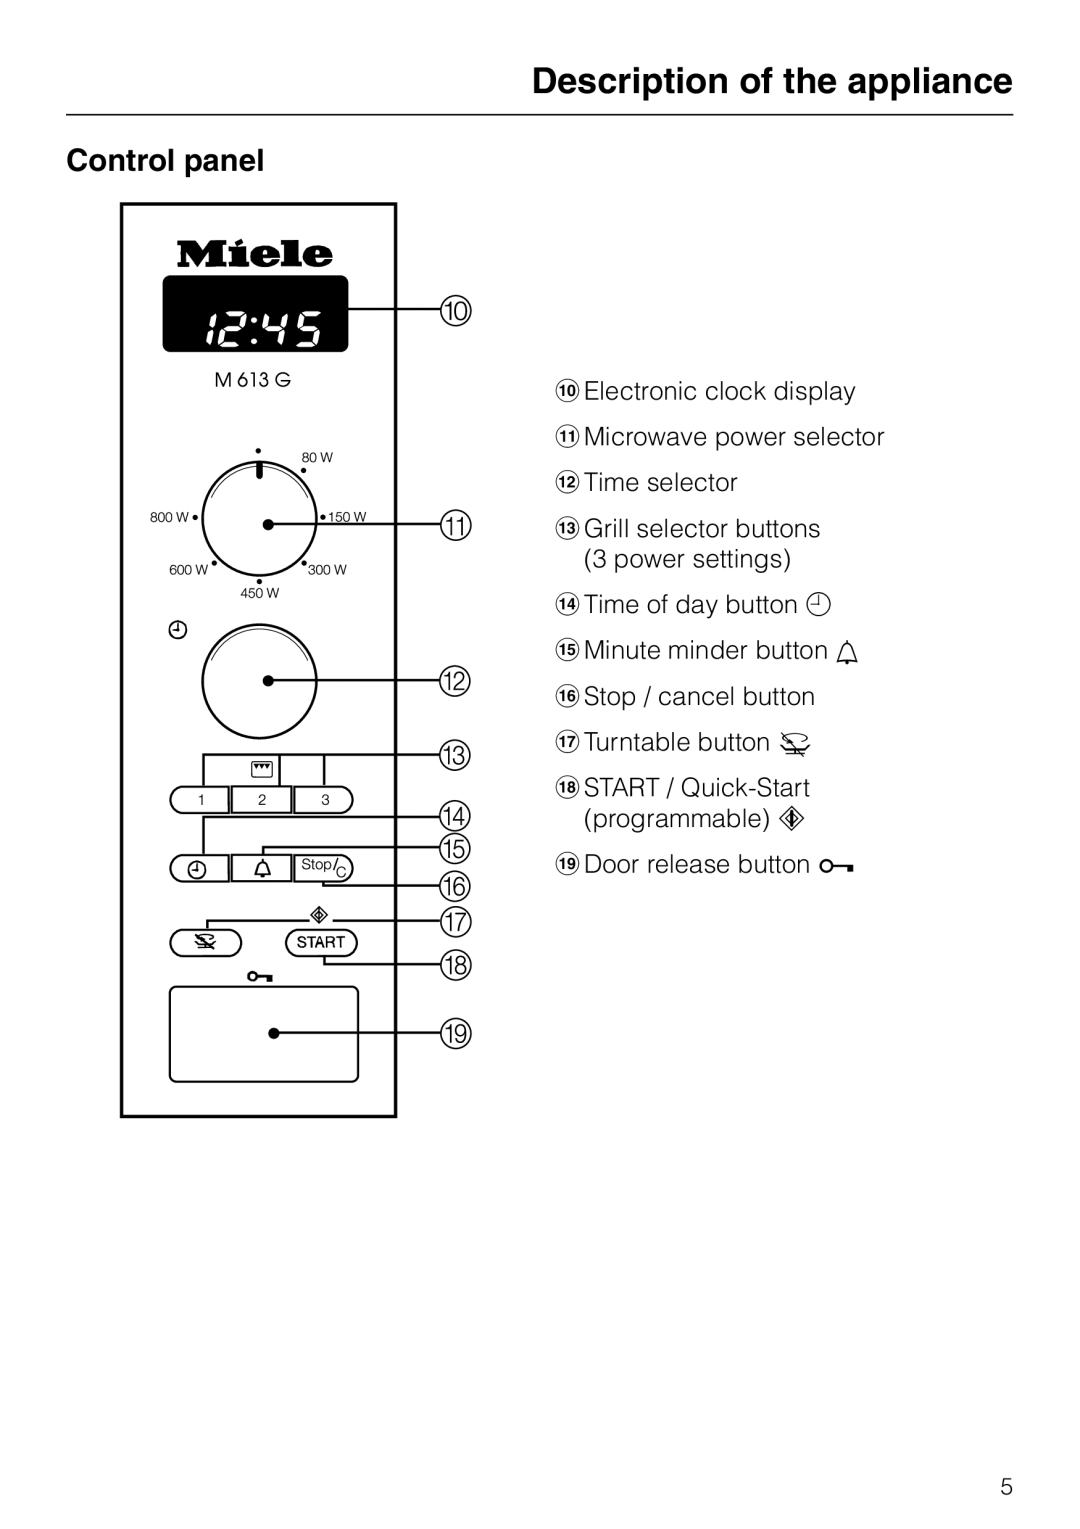 Miele M 613 G Control panel, Description of the appliance, mGrill selector buttons, power settings nTime of day button m 